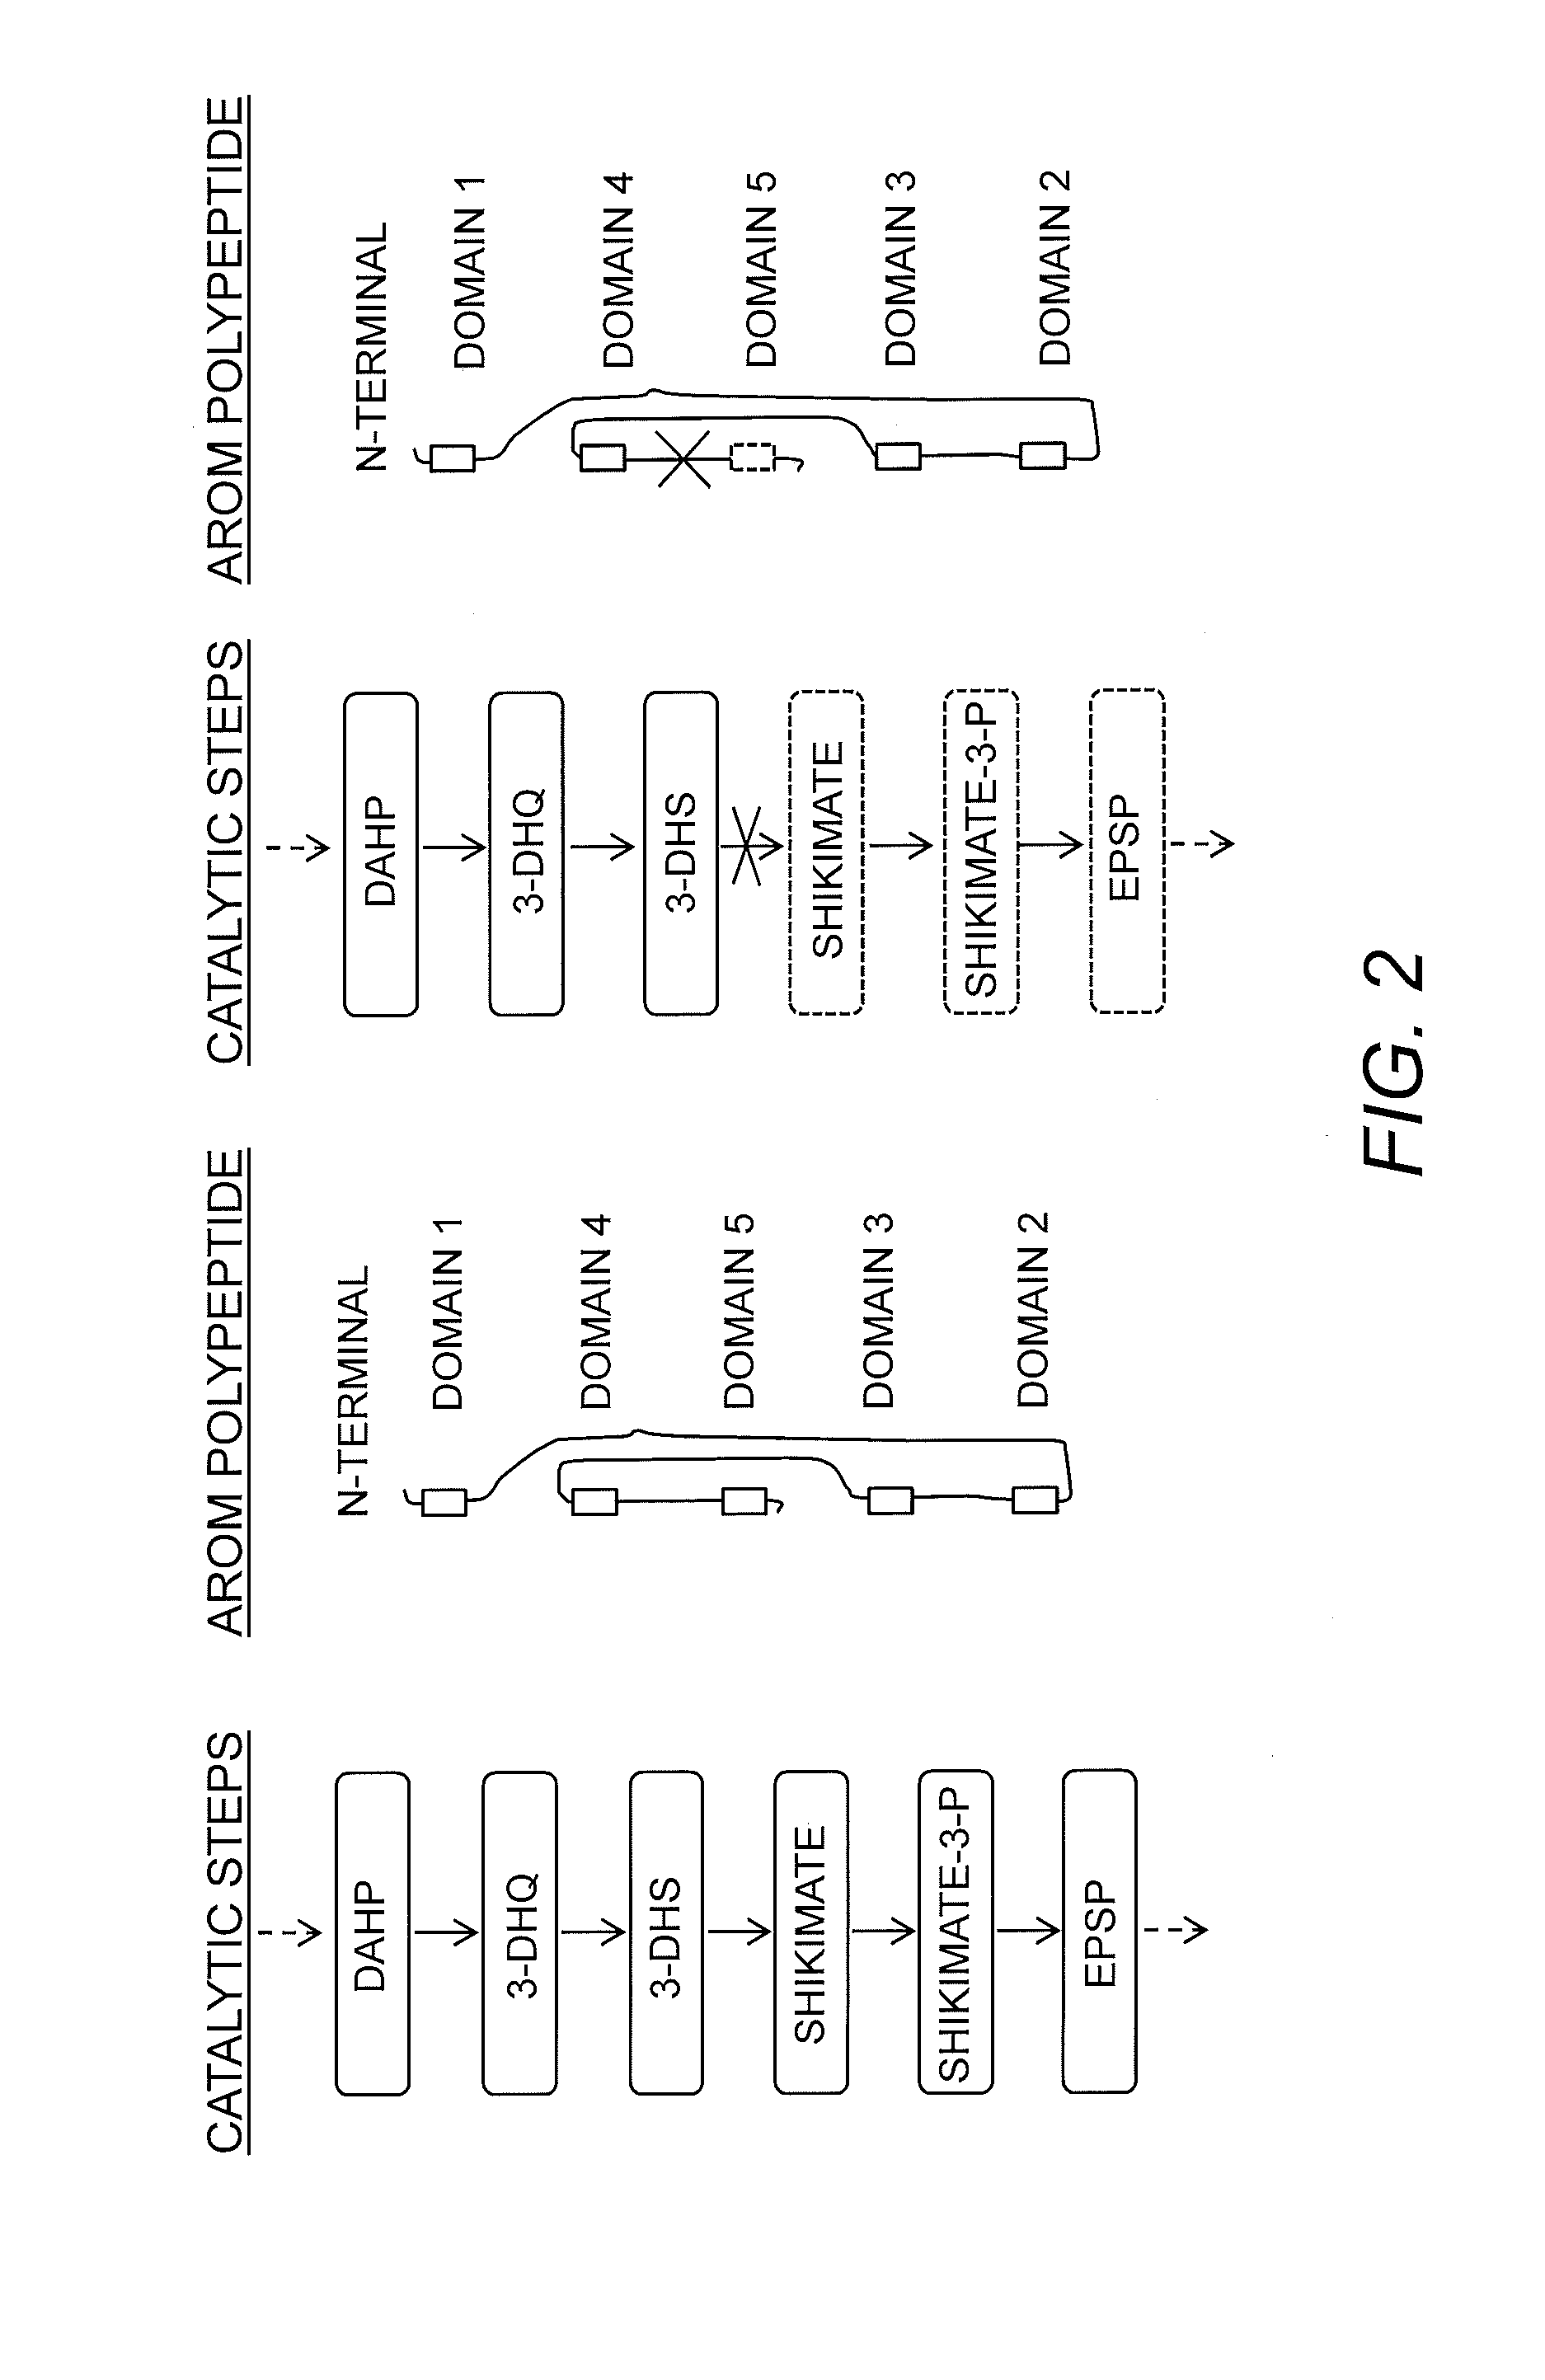 Compositions and methods for the biosynthesis of vanillan or vanillin beta-d-glucoside